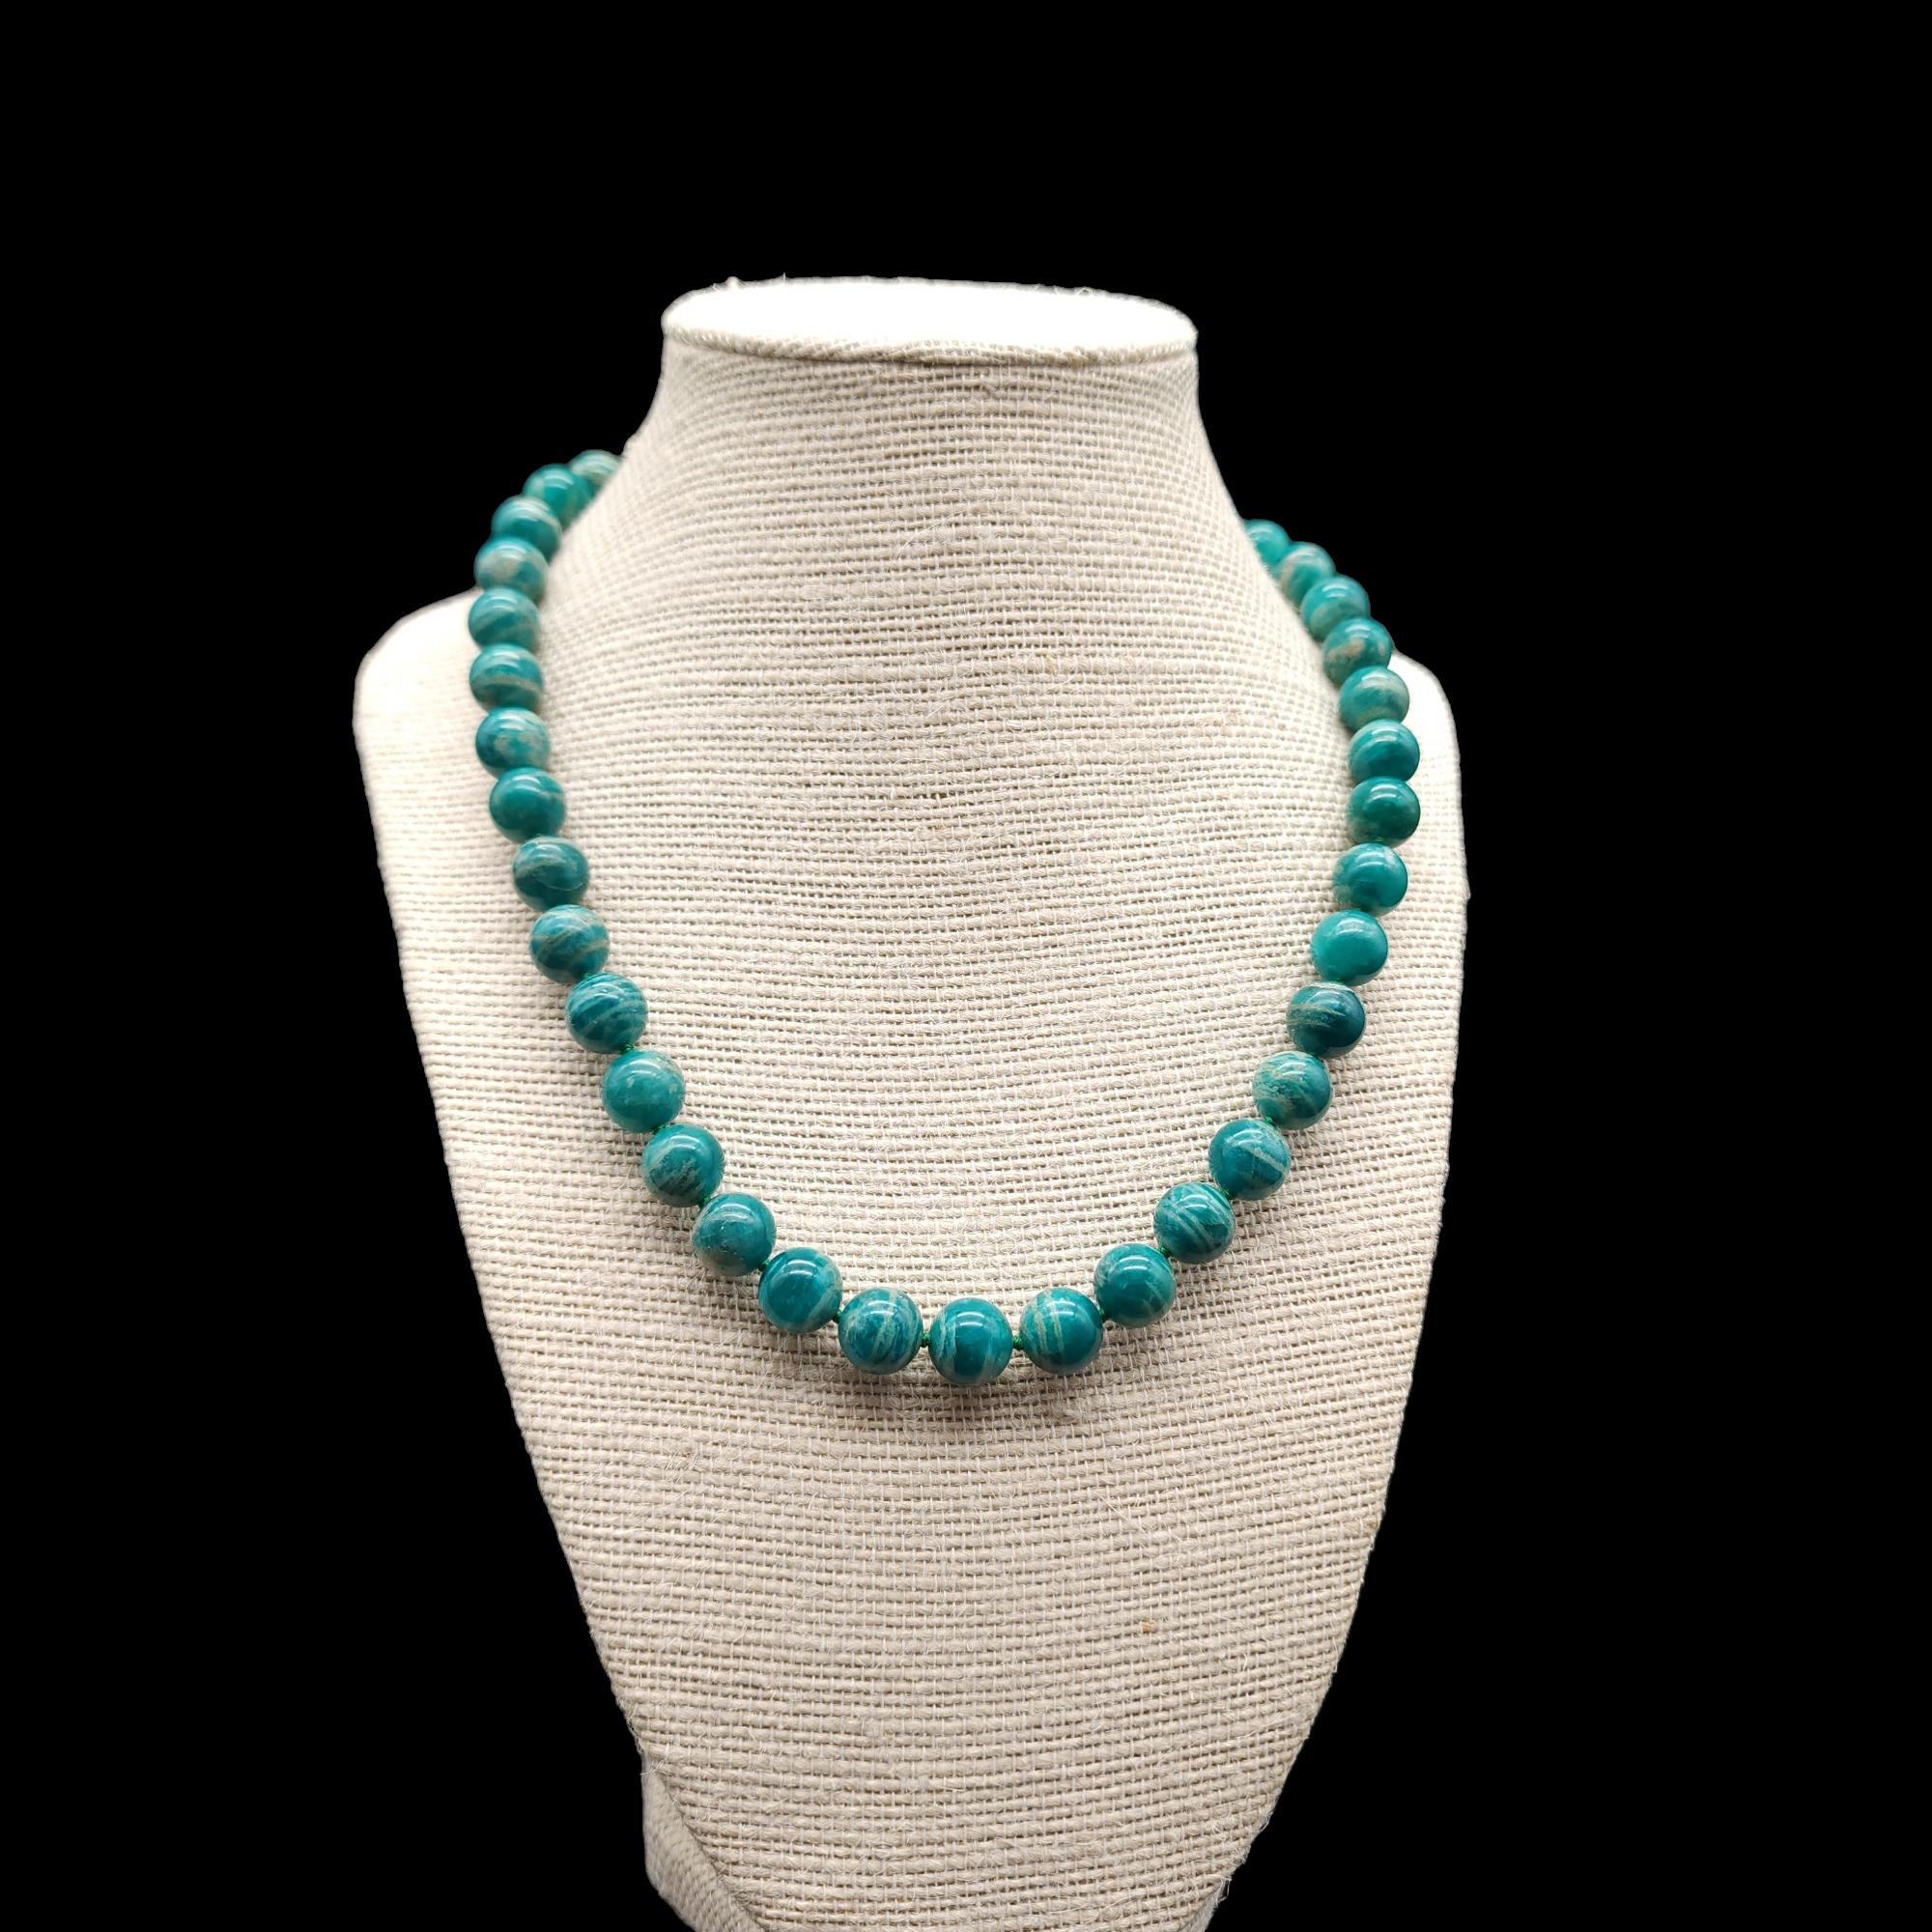 This vintage necklace features polished amazonite beads in a beautiful shade of blue-green. The beads are strung on a secure rope and connected with a sterling silver clasp. The necklace has a collar length, making it perfect for adding a pop of